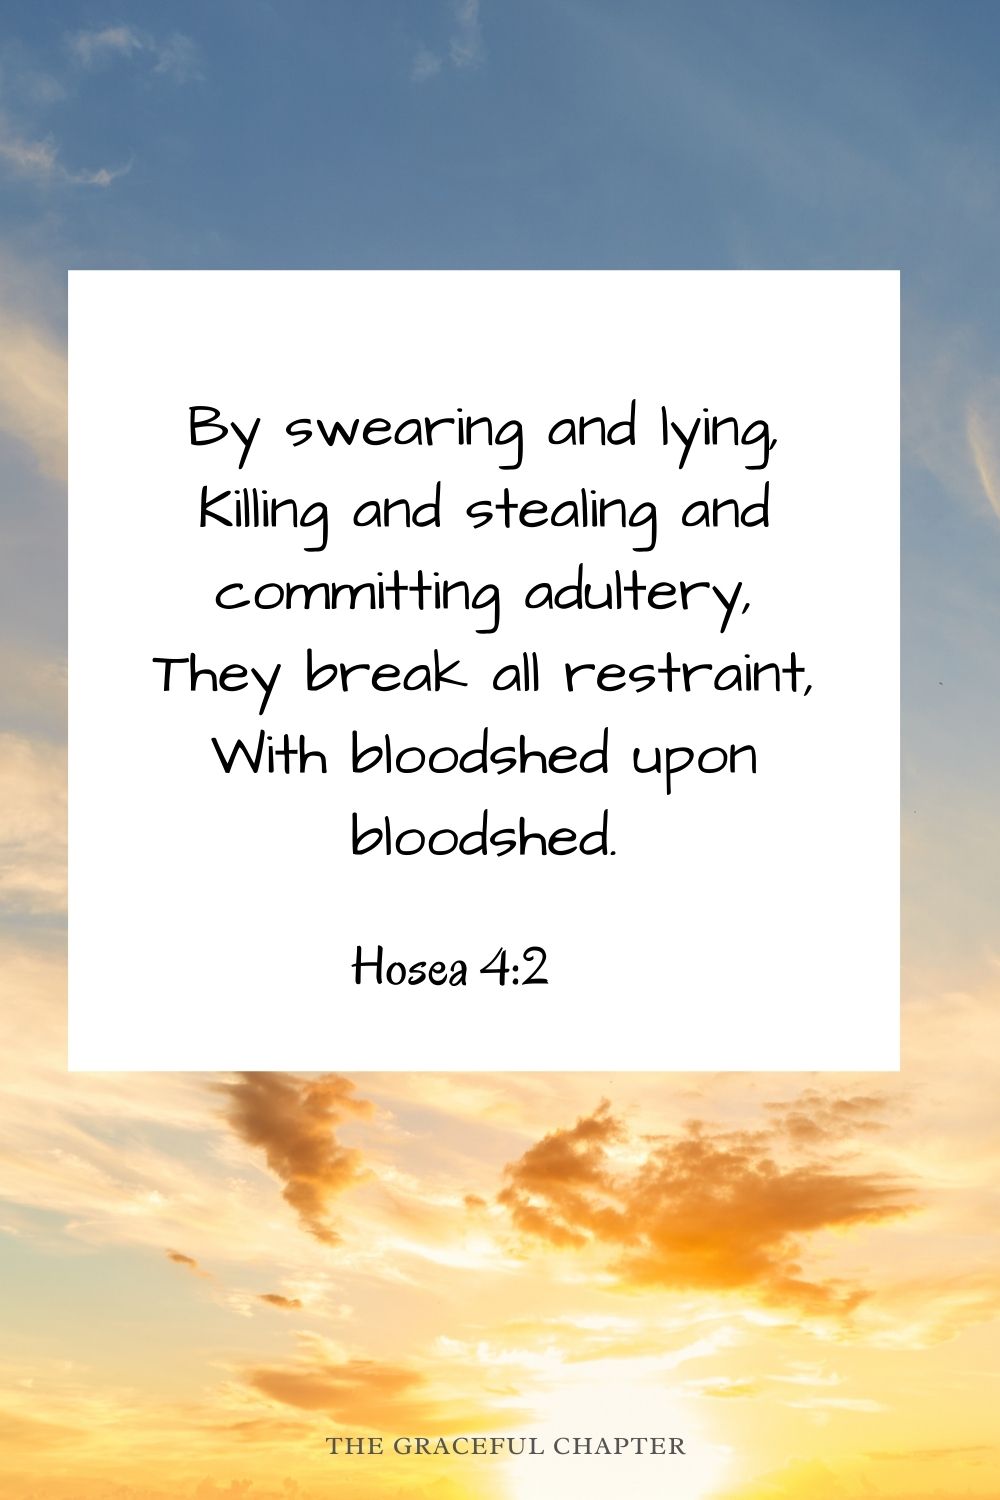 By swearing and lying, Killing and stealing and committing adultery, They break all restraint, With bloodshed upon bloodshed. Hosea 4:2